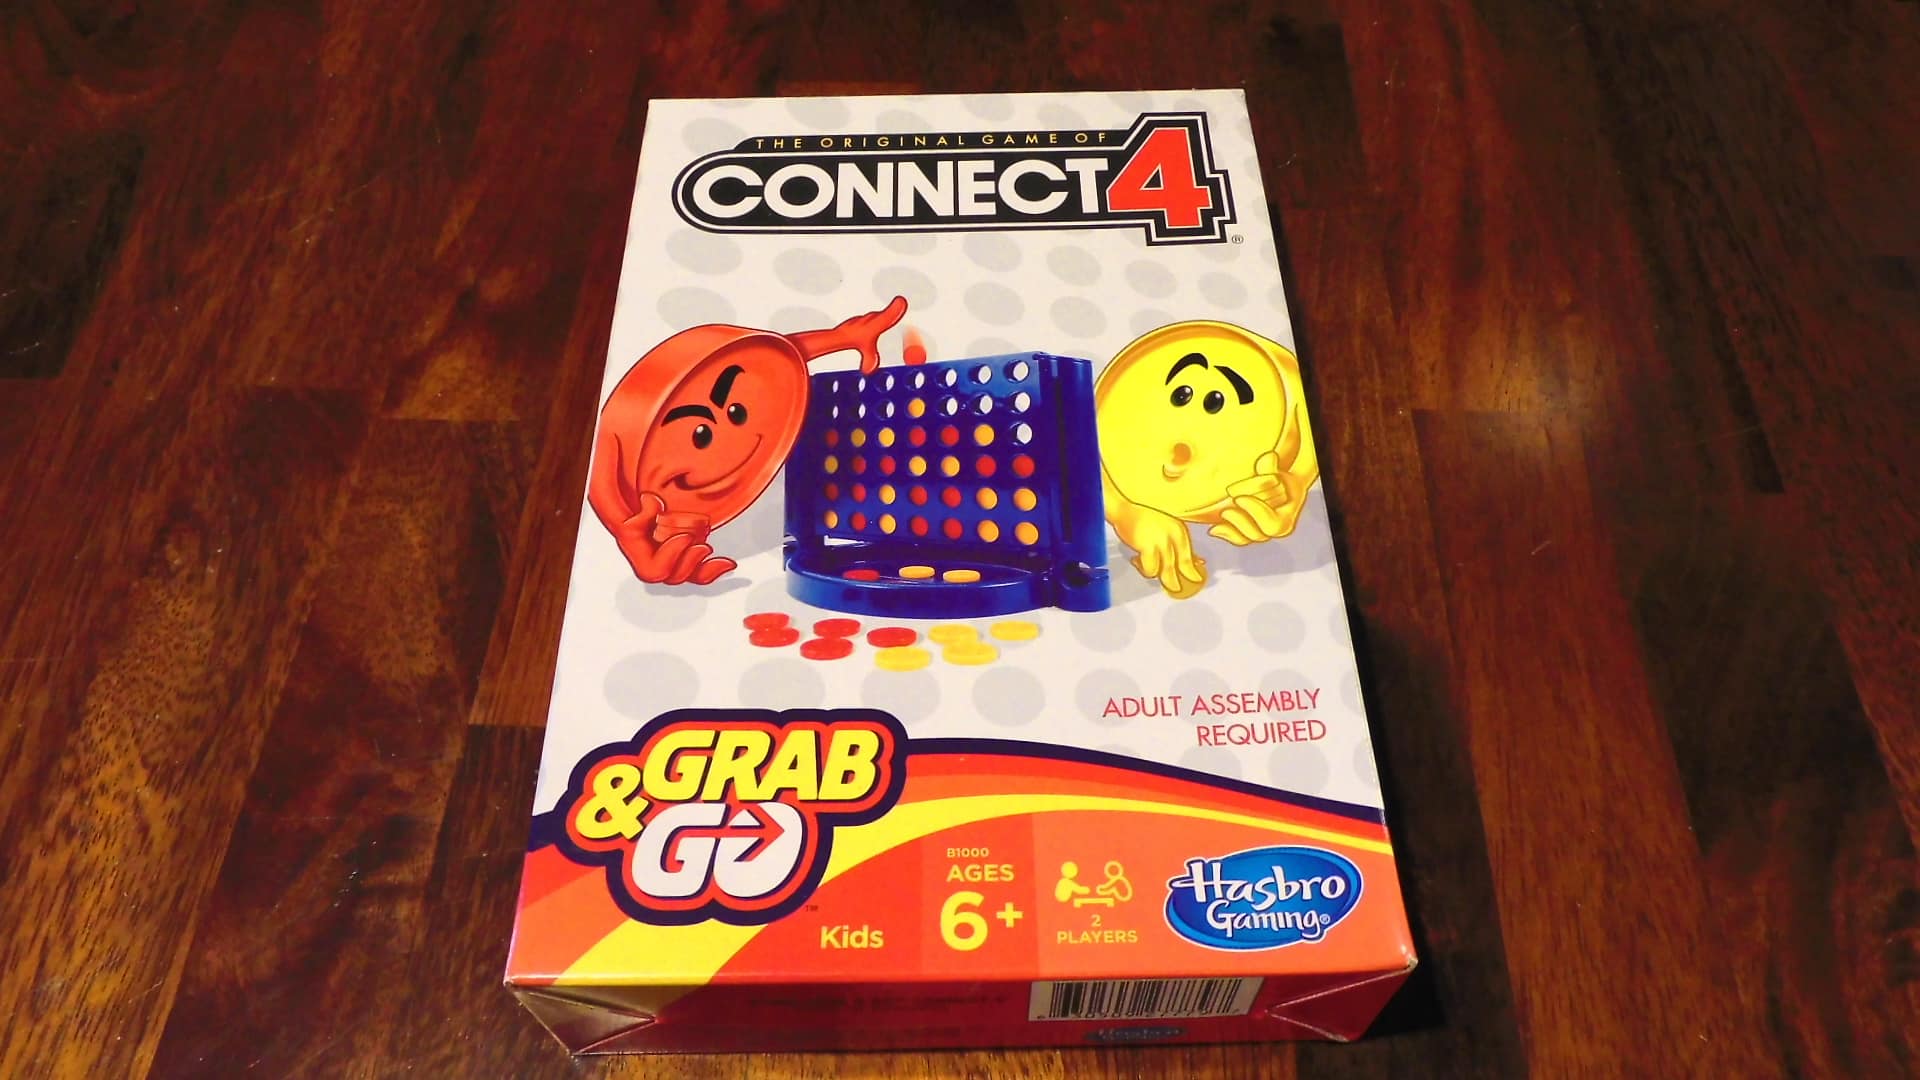 A closeup of the box cover for Connect 4 Grab & Go.